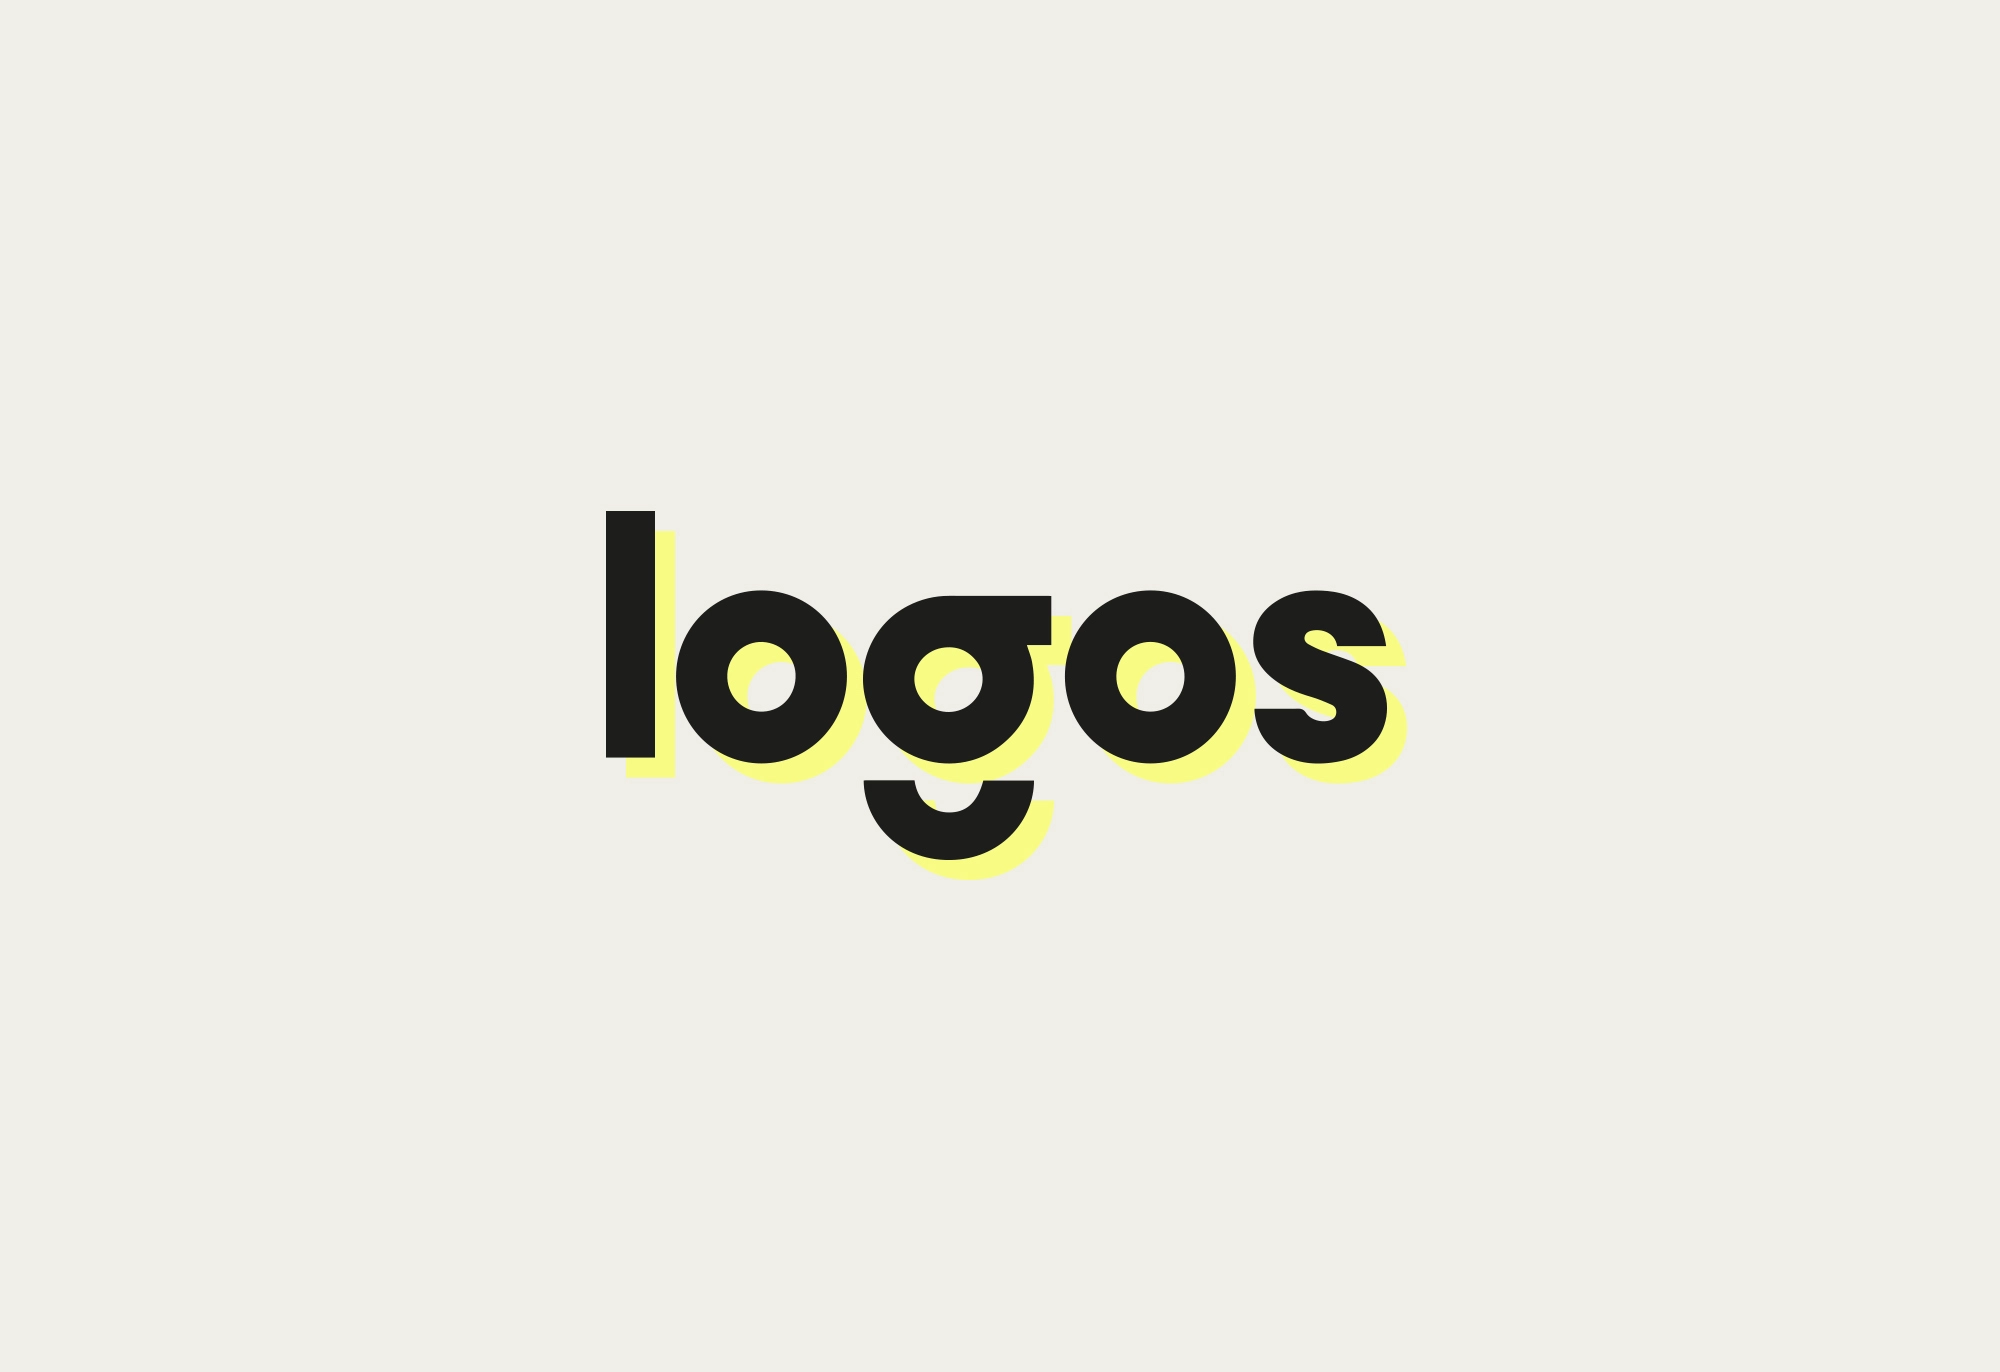 black text reading logos with a neon yellow drop shadow effect